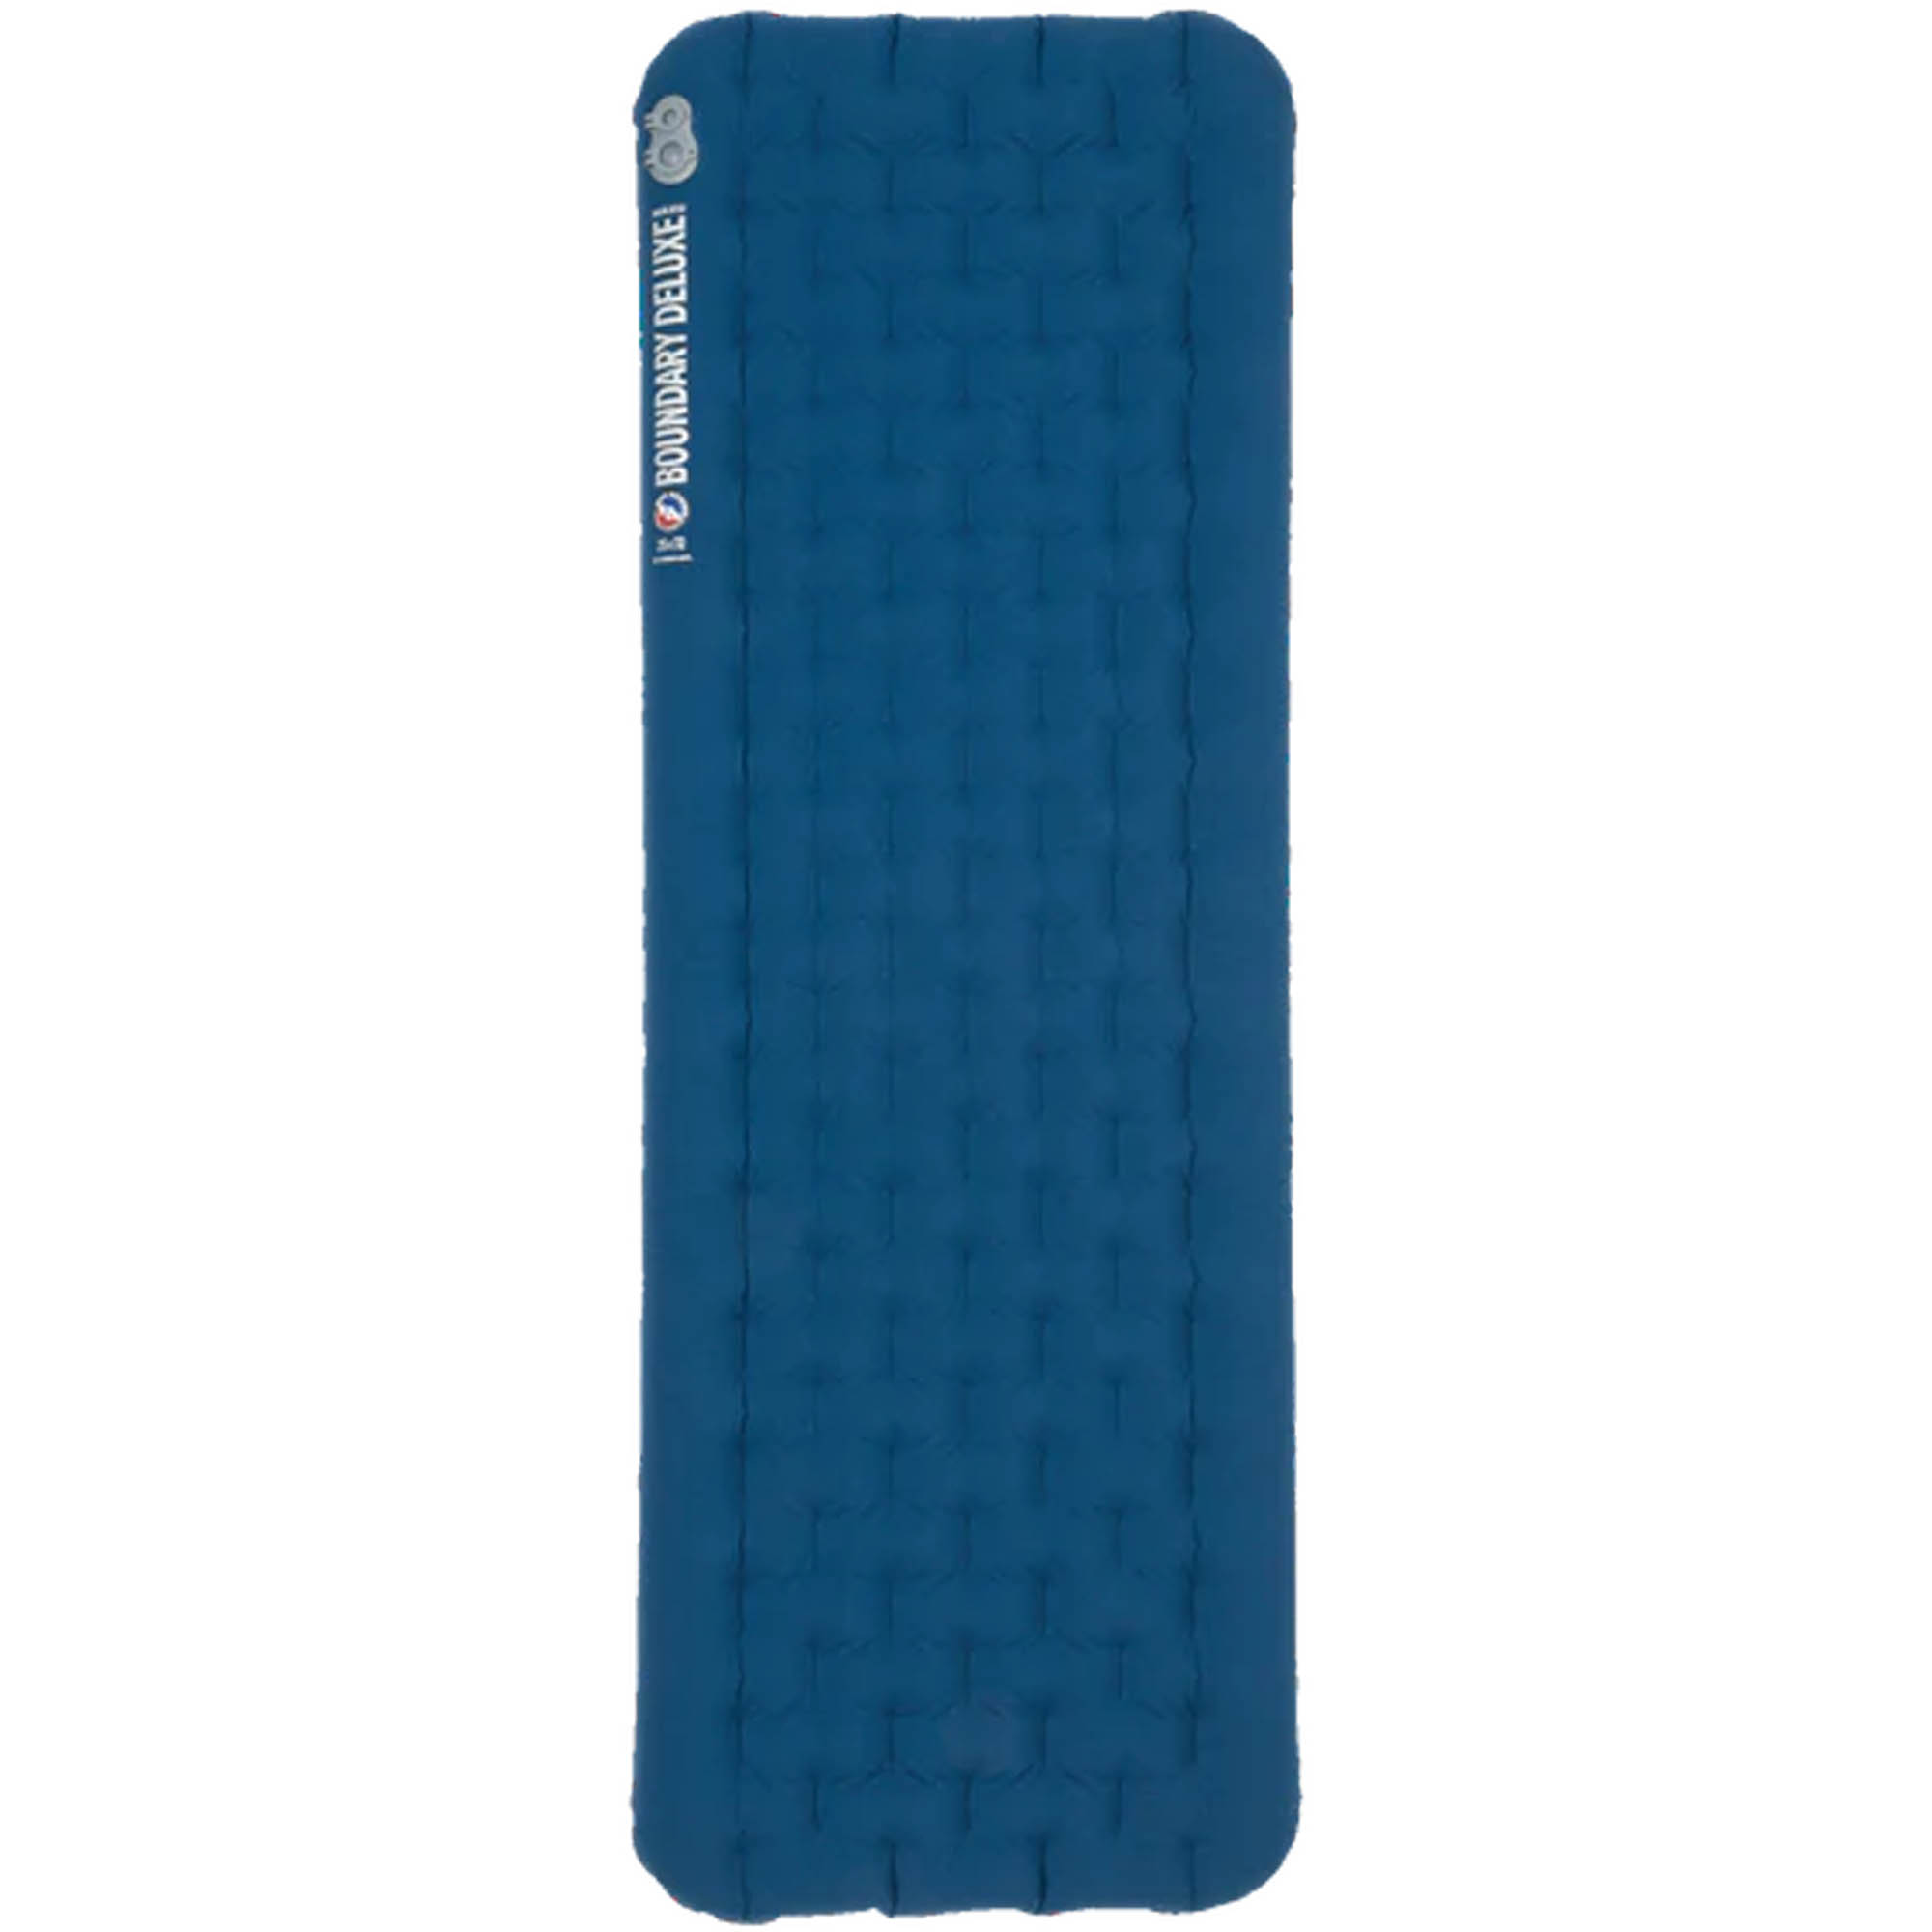 Photos - Camping Mat Big Agnes Boundary Deluxe Long Wide Insulated Sleeping Pad, Blue PBDIWL23 